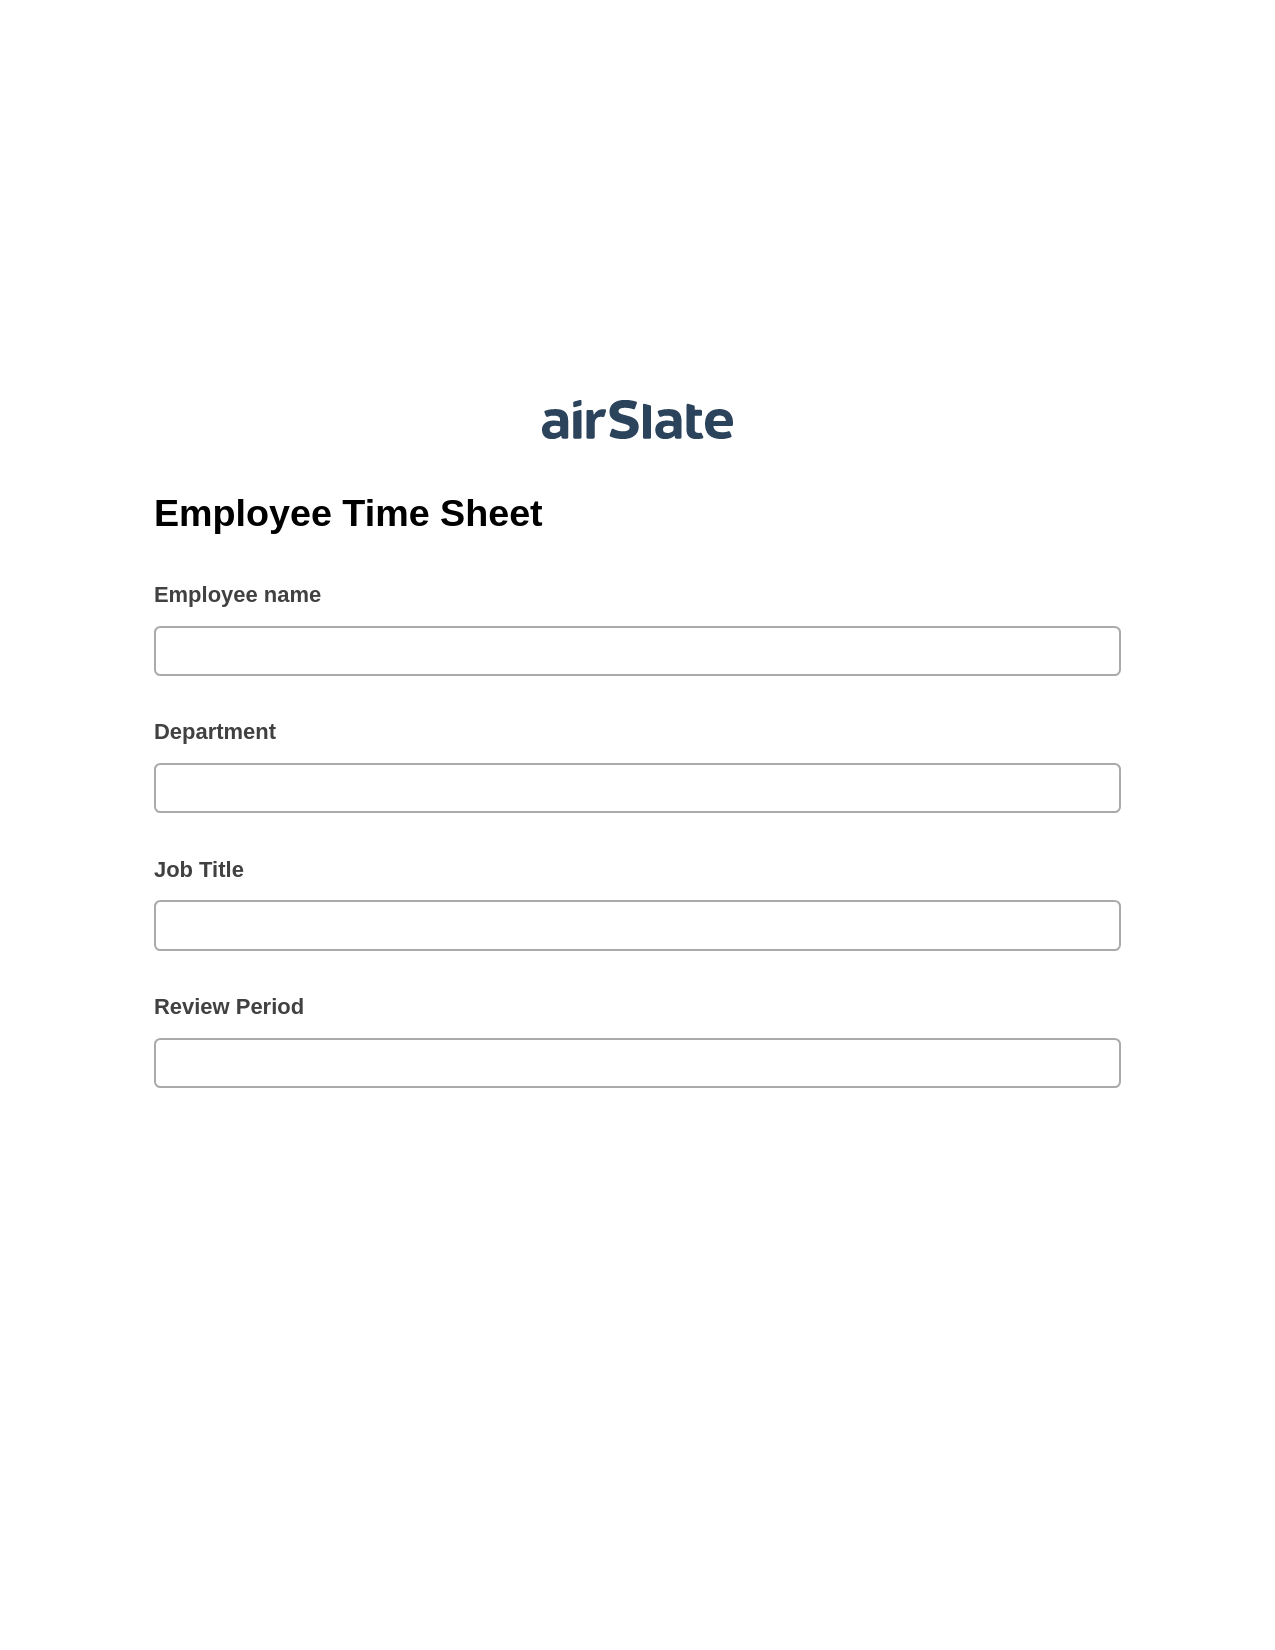 Employee Time Sheet Pre-fill from MySQL Bot, Assign Roles to Recipients Bot, Export to Excel 365 Bot